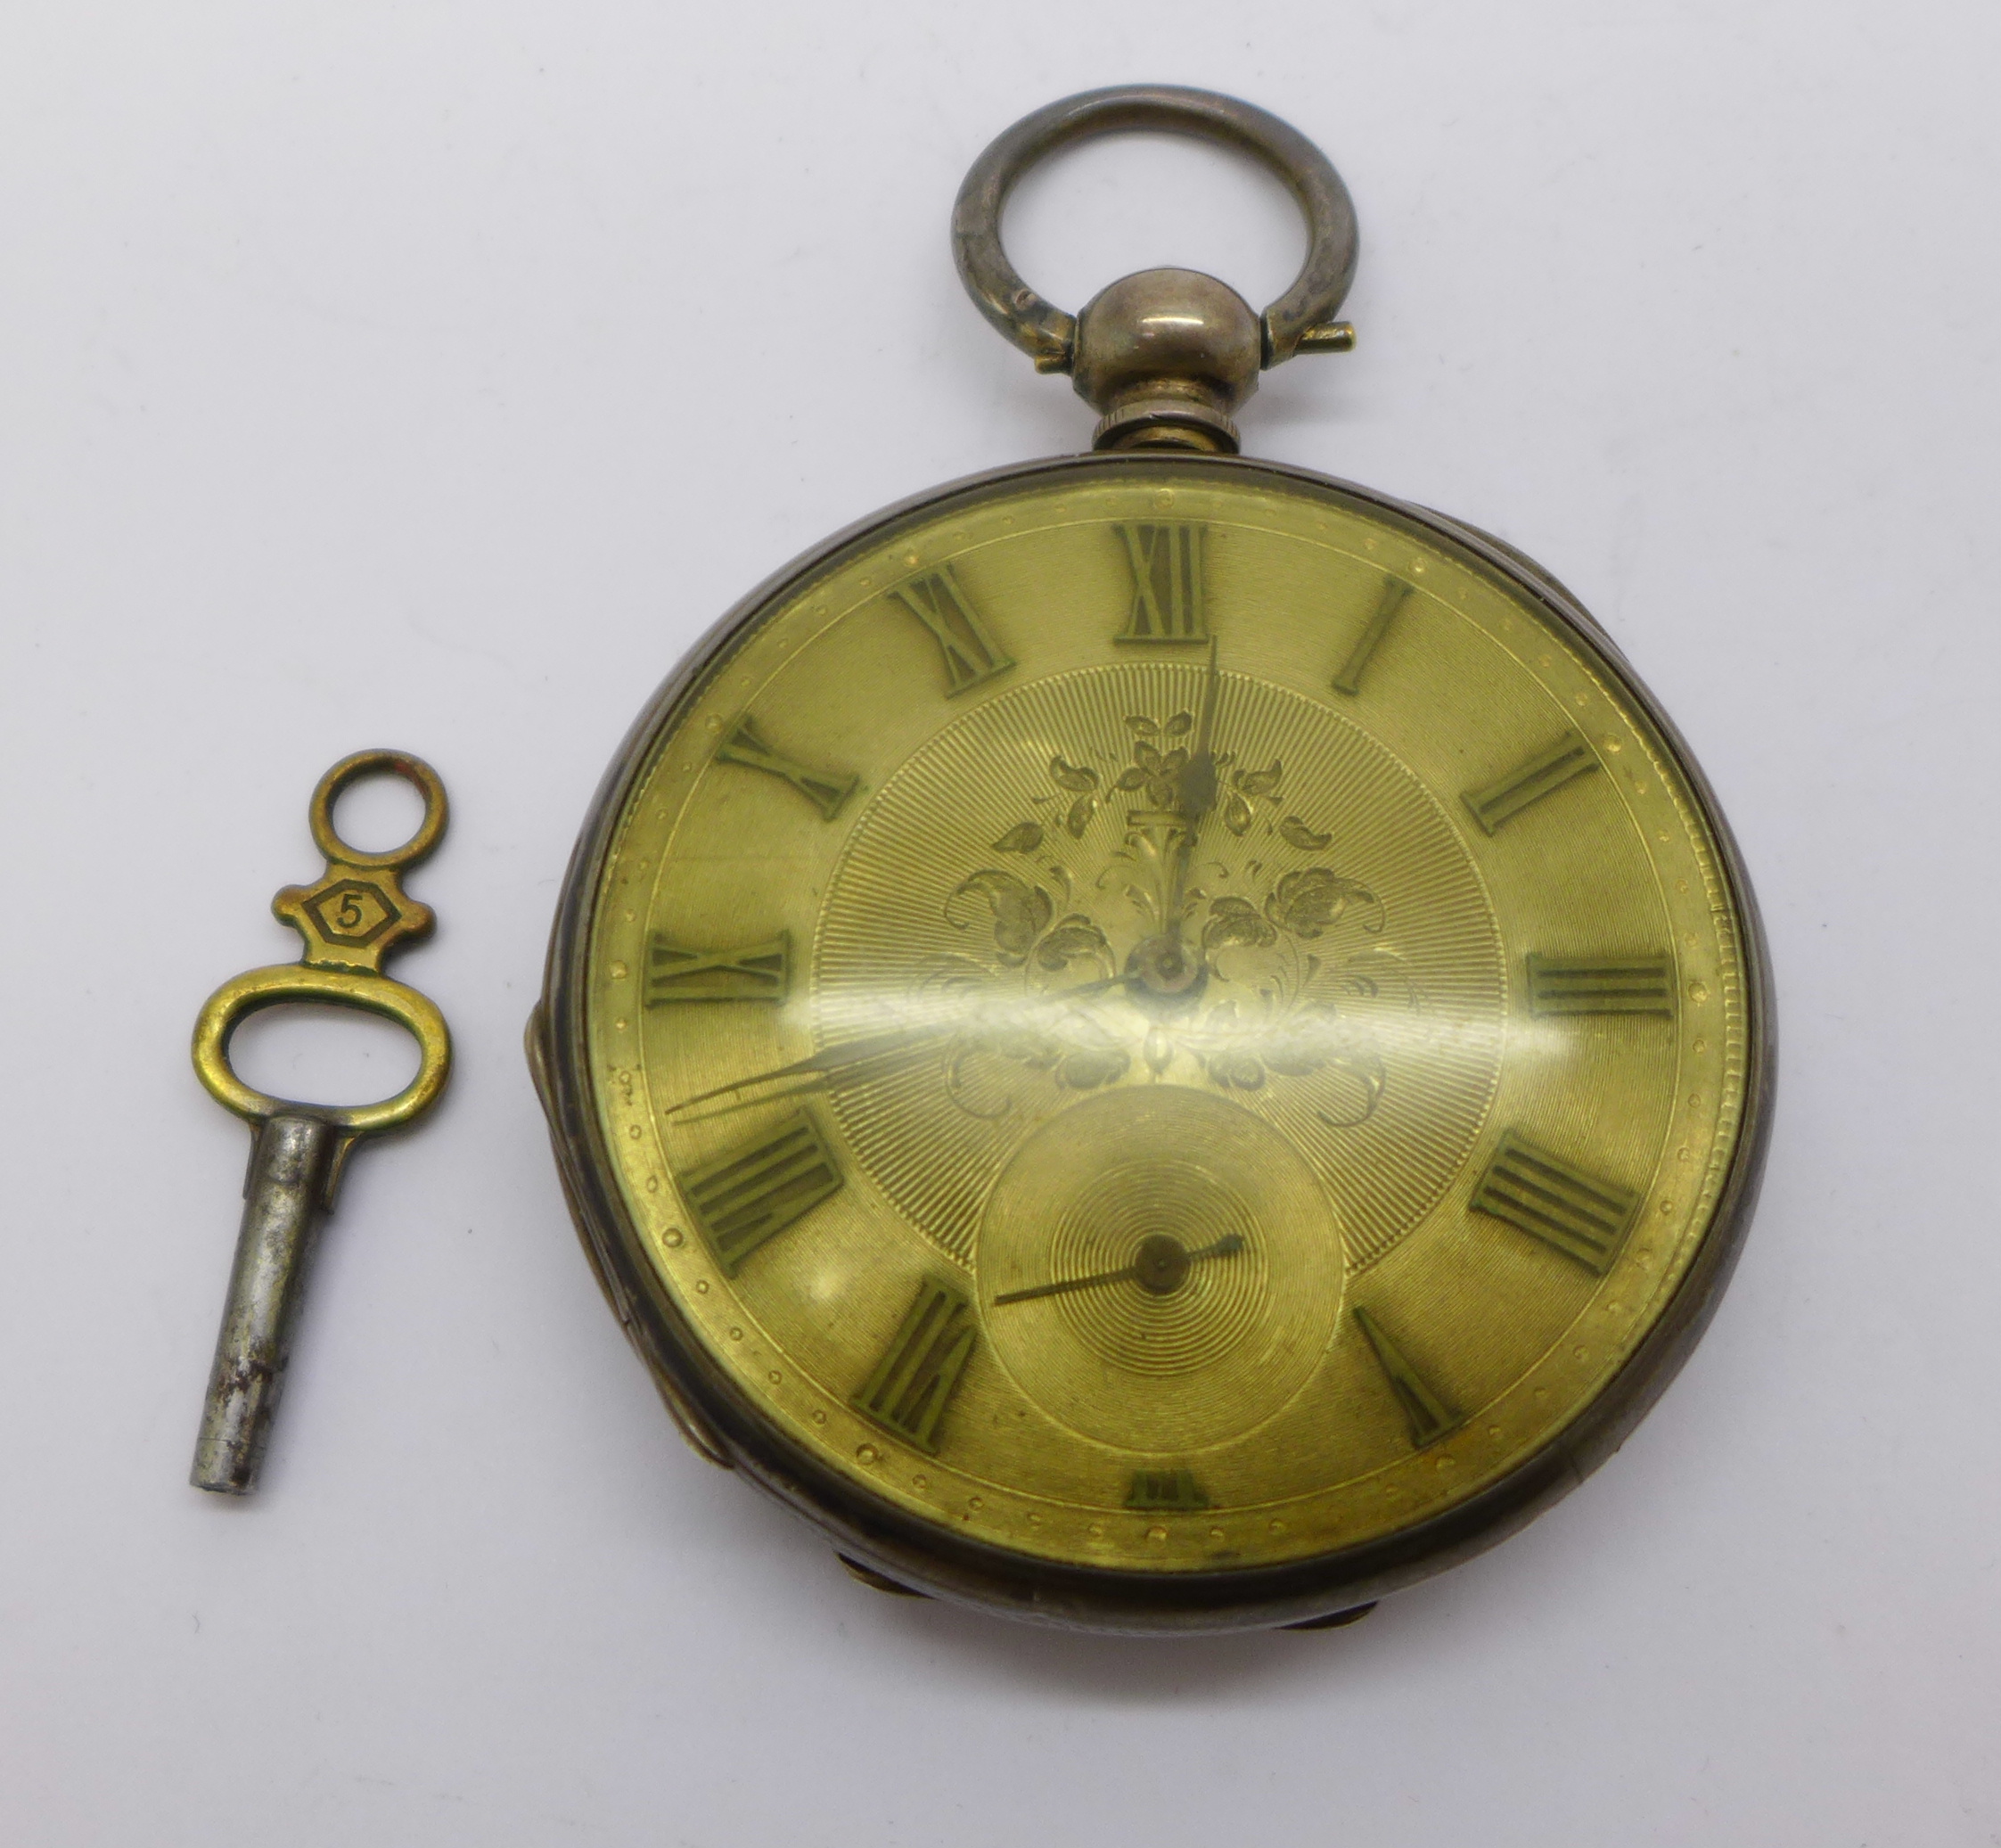 A silver pocket watch with silver dial and key